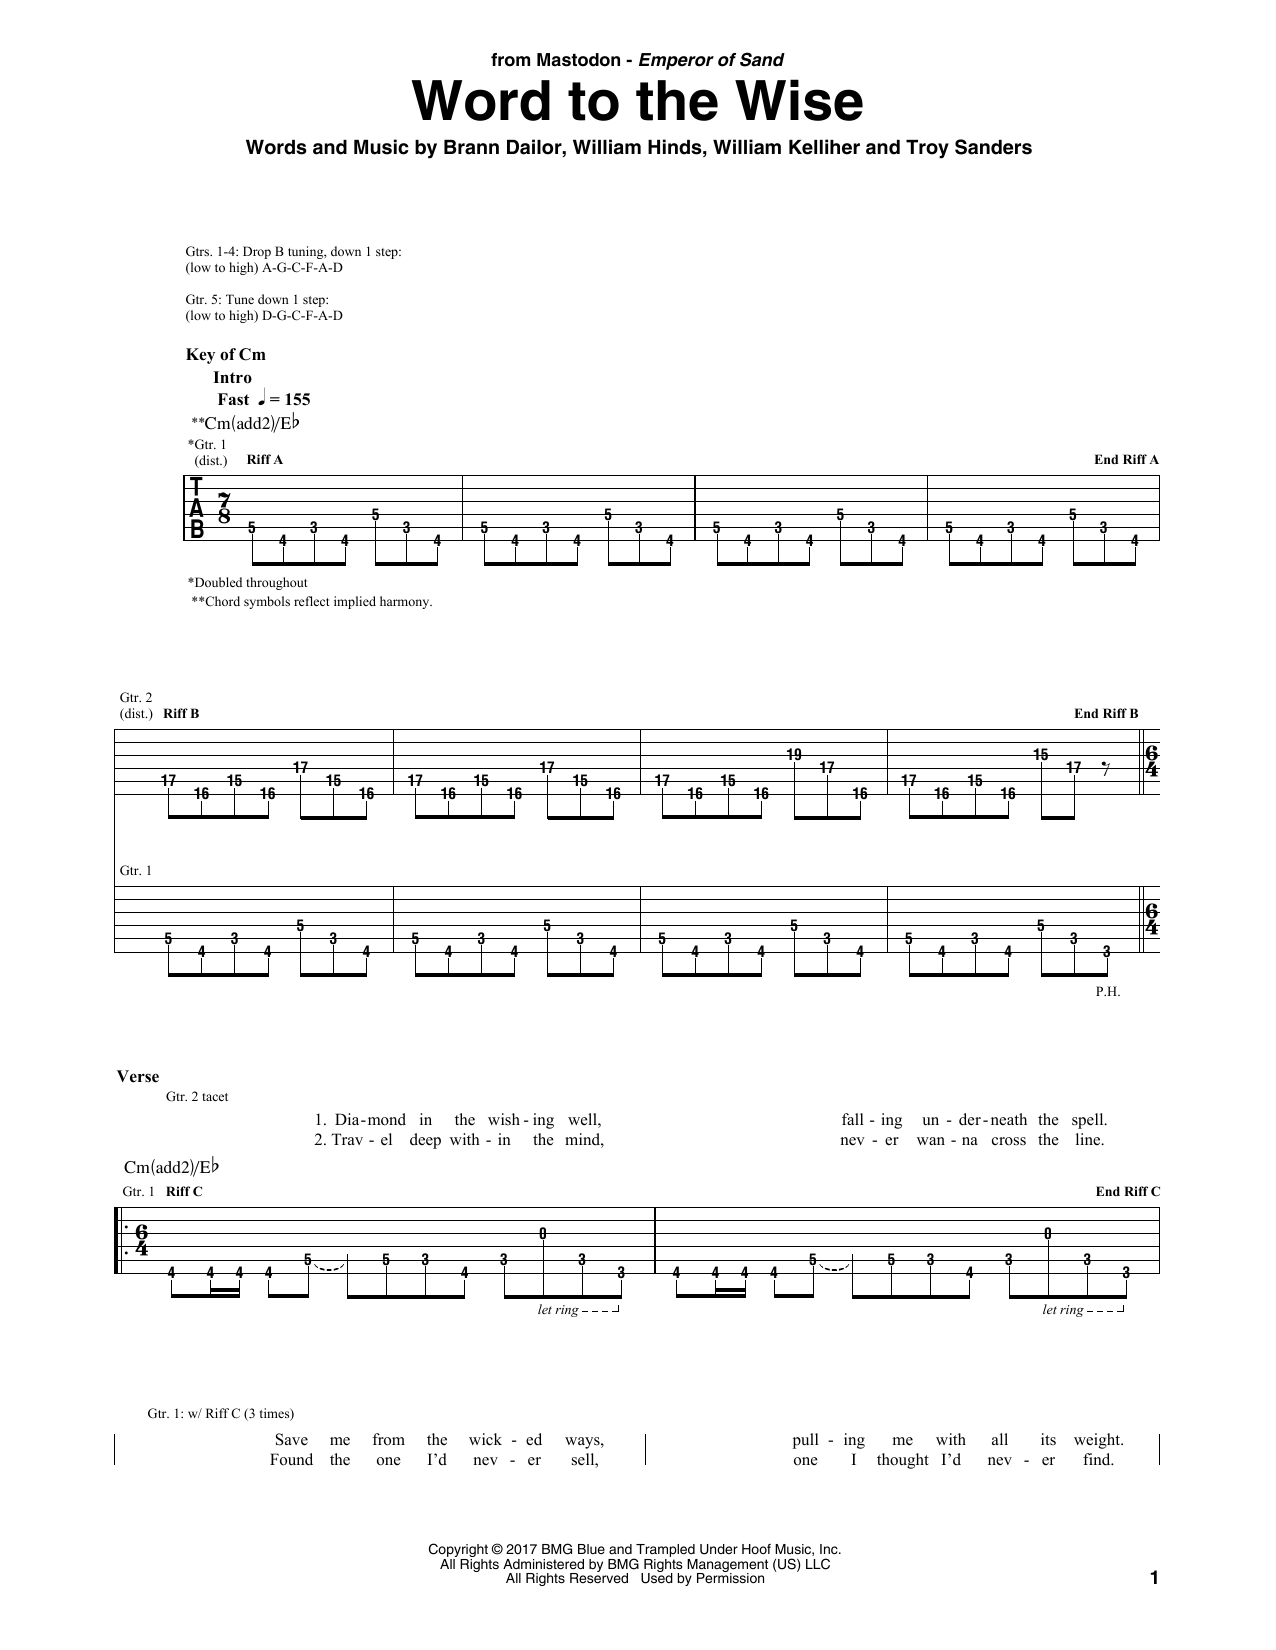 Download Mastodon Word To The Wise Sheet Music